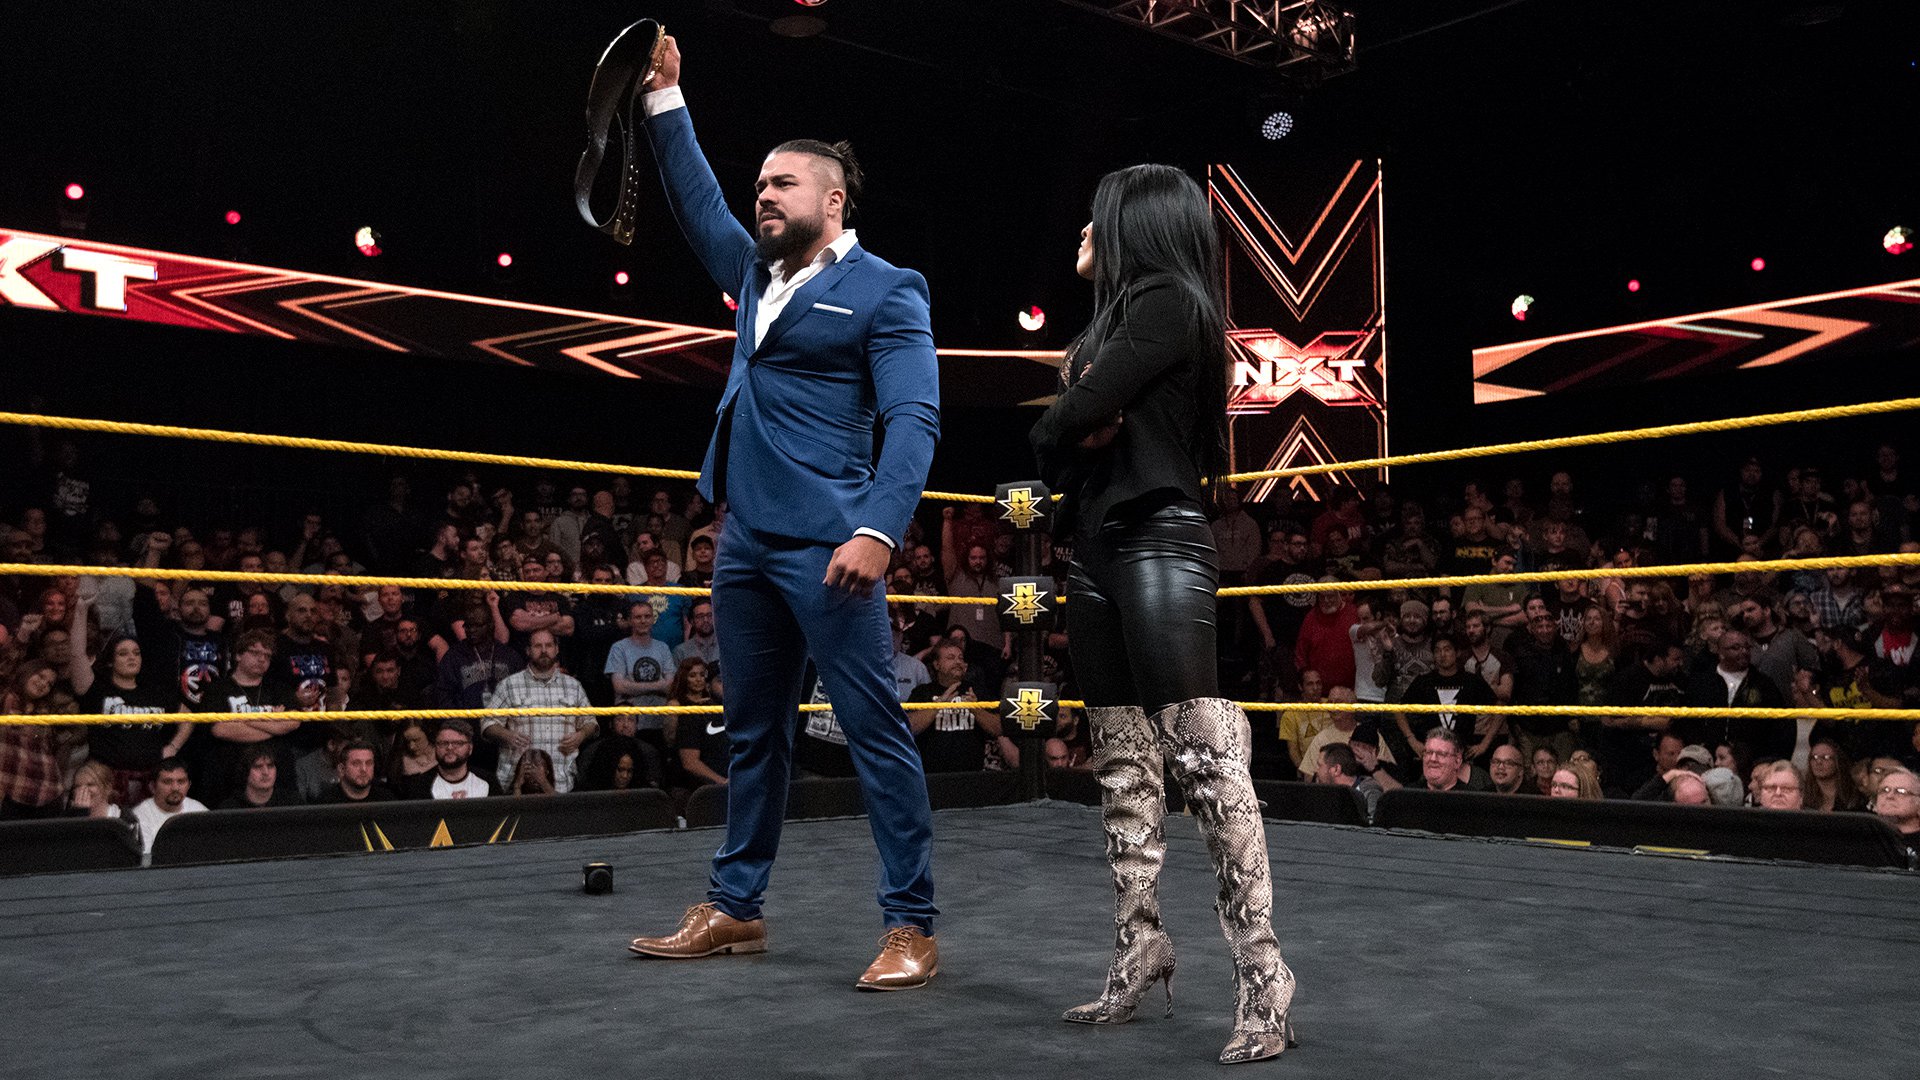 NXT Champion Andrade “Cien” Almas demanded that Aleister Black show up next week to pay for his “disrespect”